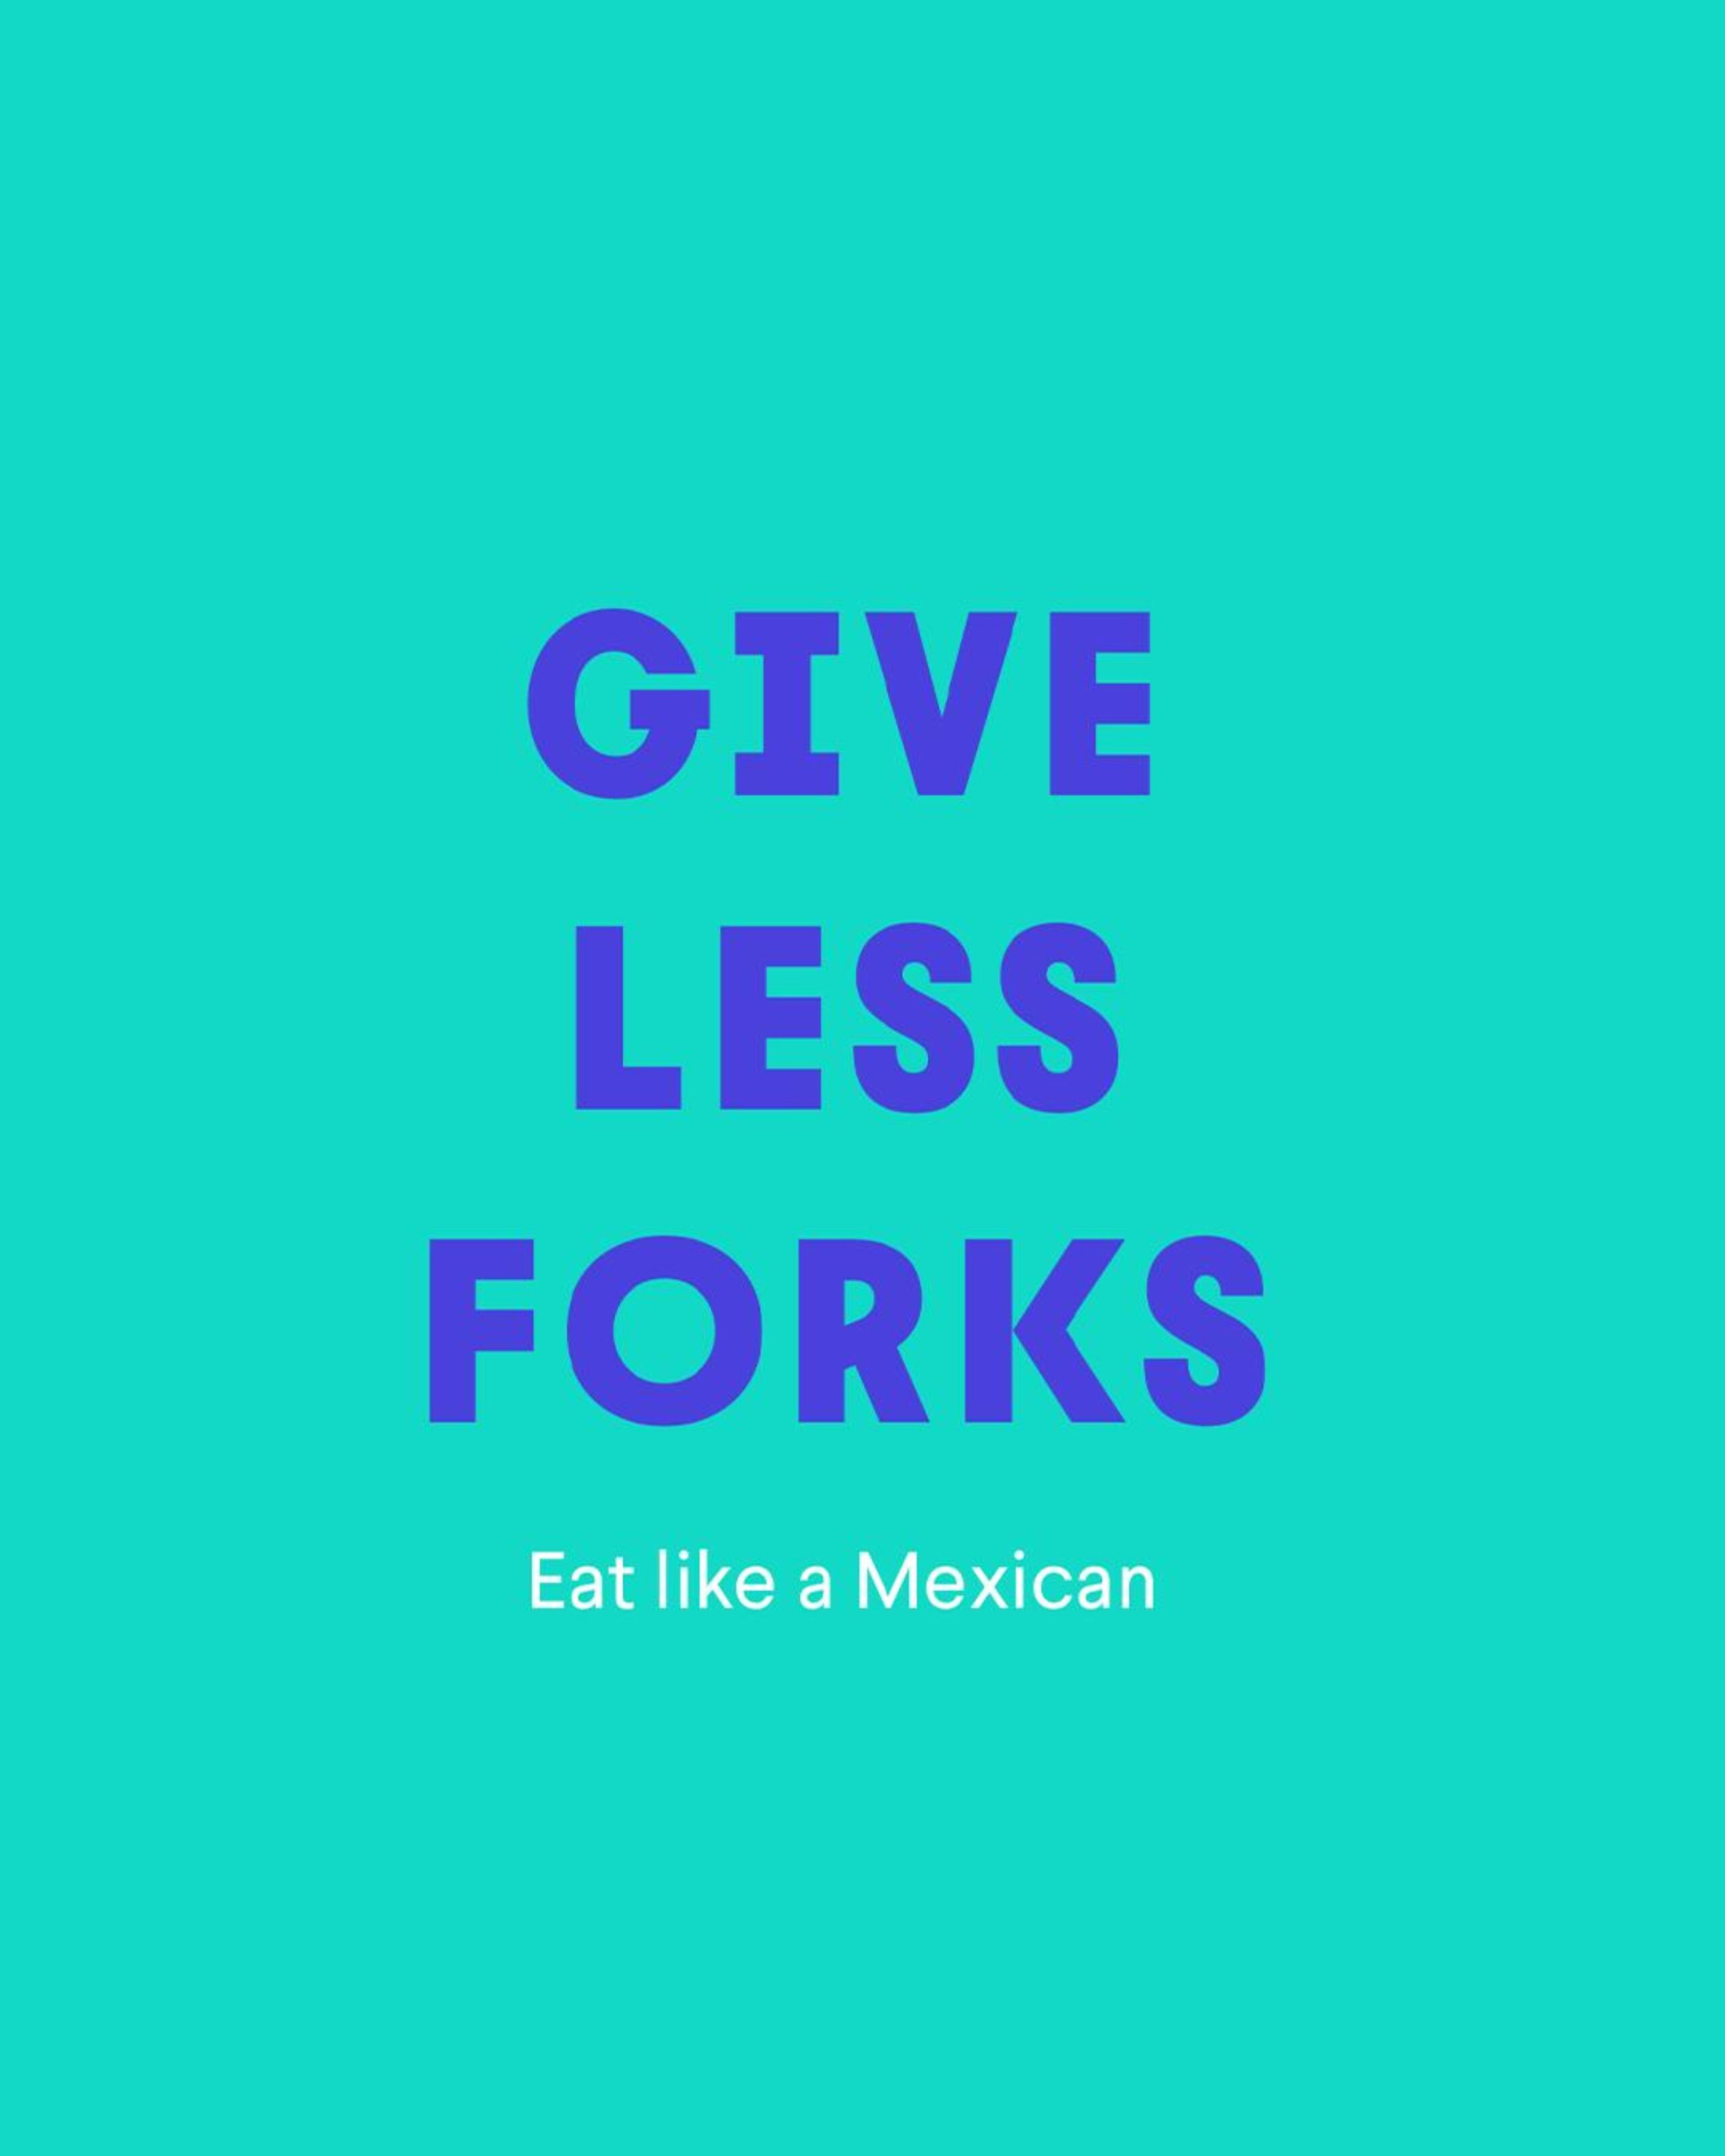 Food branding and copywriting services for Wahaca